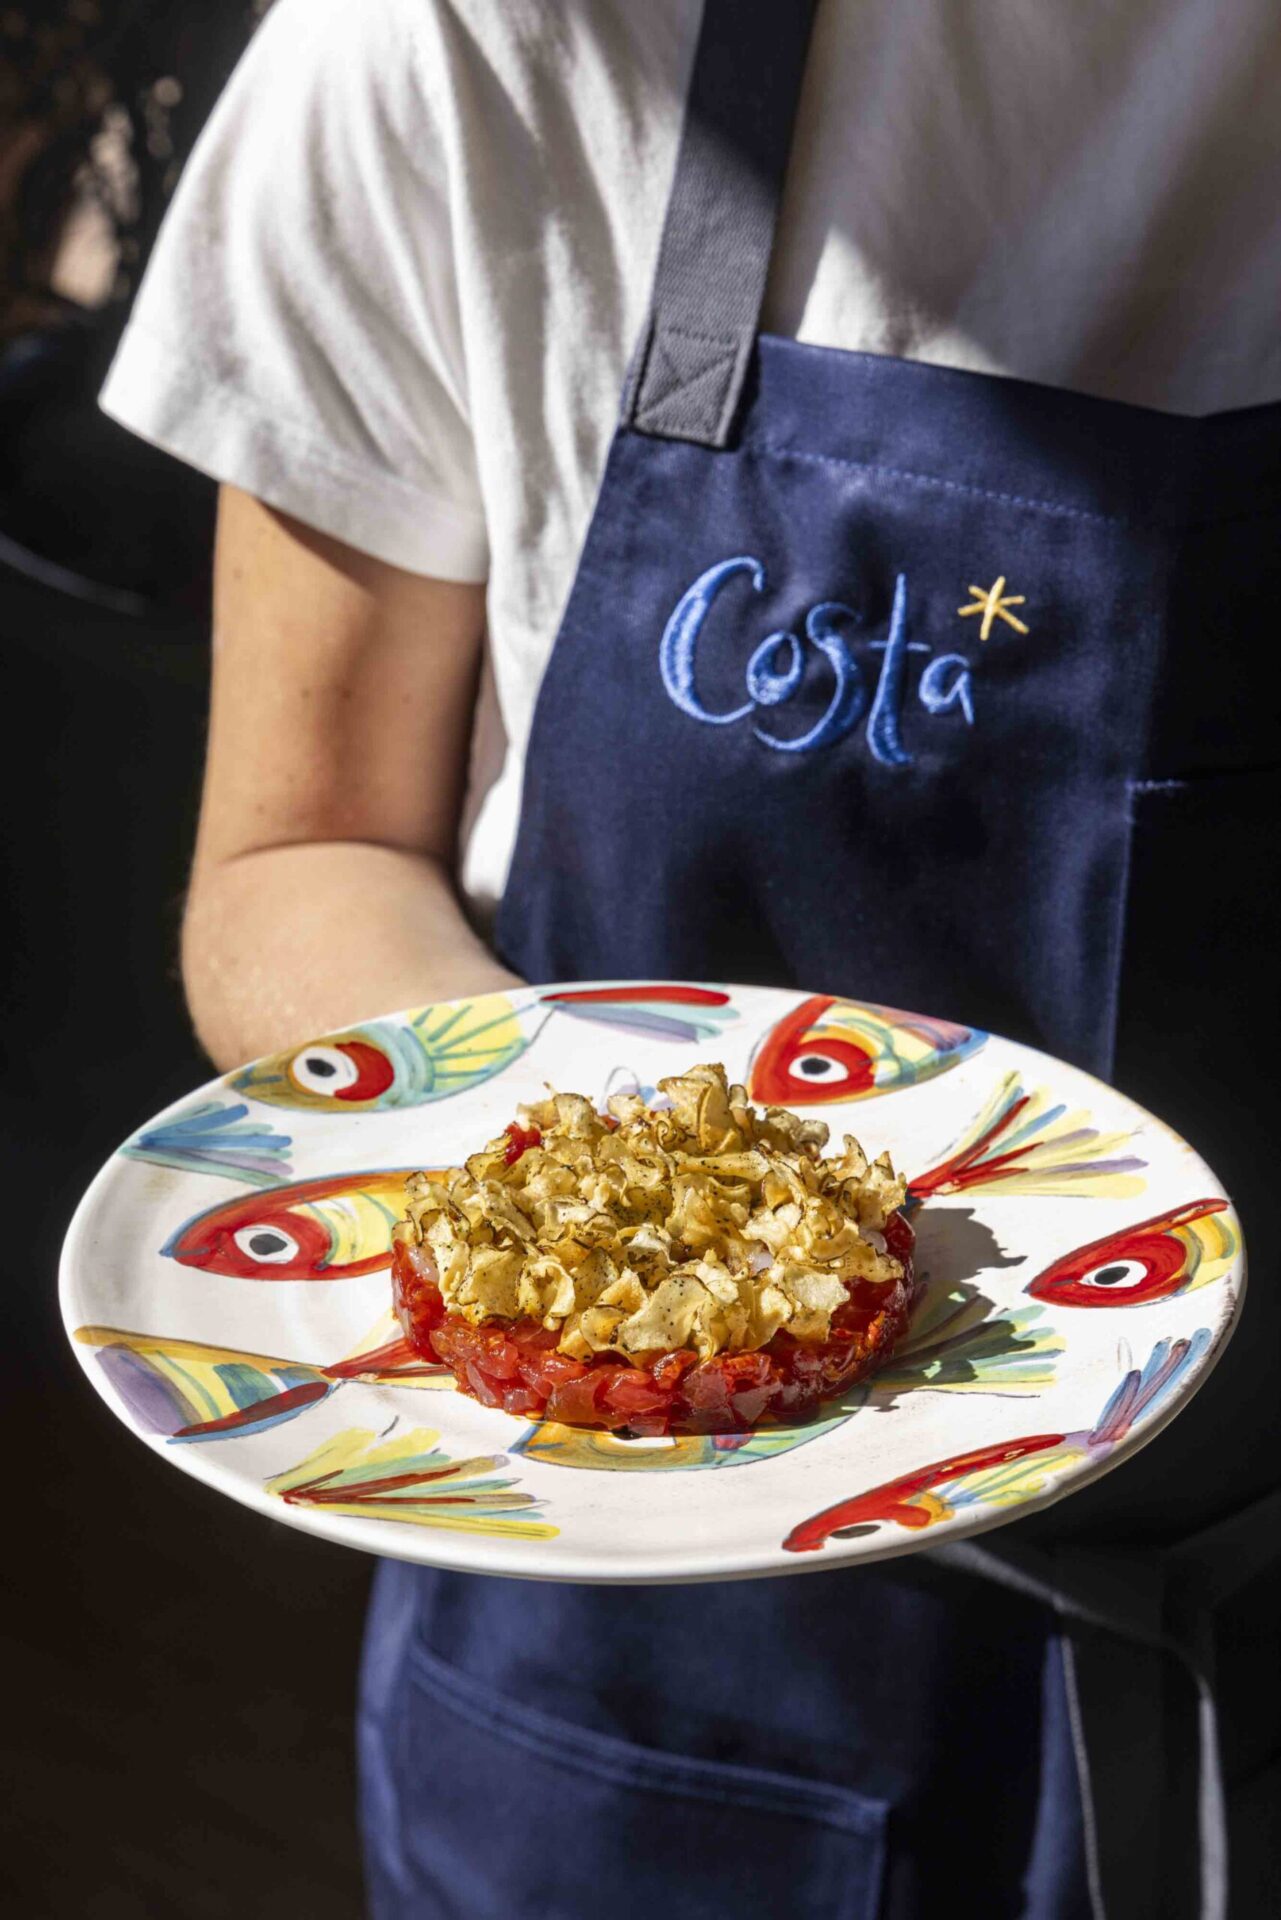 Tuna at Costa on a plate held by someone in an apron